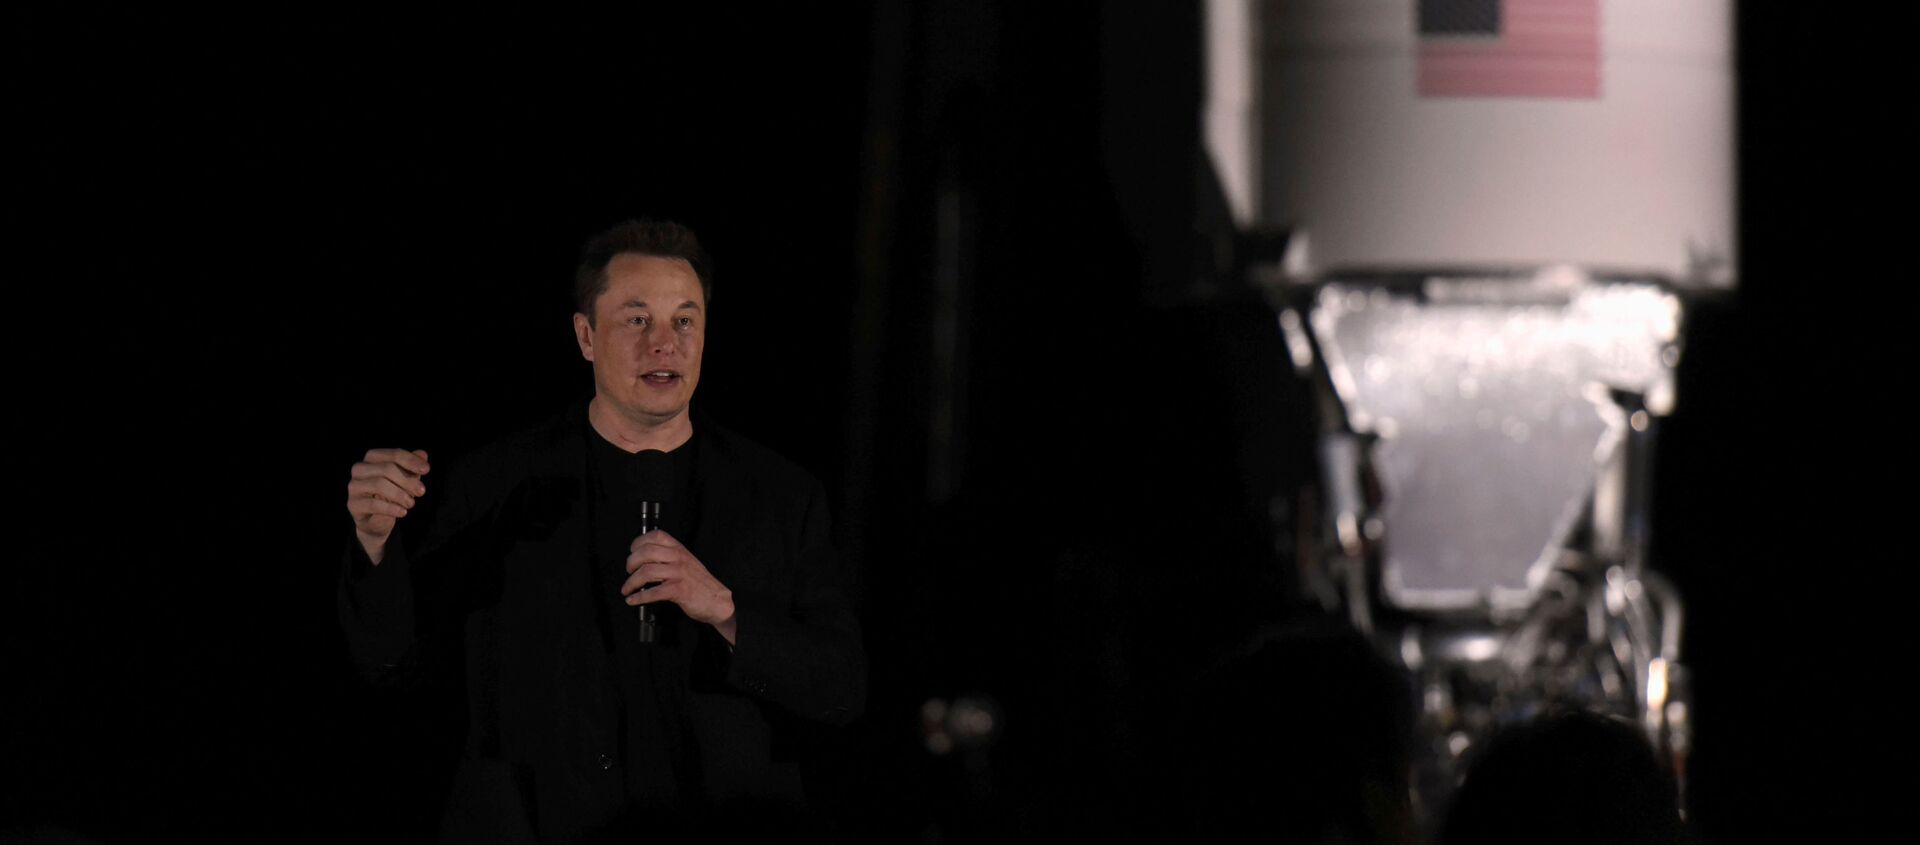 FILE PHOTO: SpaceX's Elon Musk gives an update on the company's Mars rocket Starship in Boca Chica, Texas U.S. September 28, 2019. REUTERS/Callaghan O'Hare/File Photo - Sputnik International, 1920, 10.08.2021